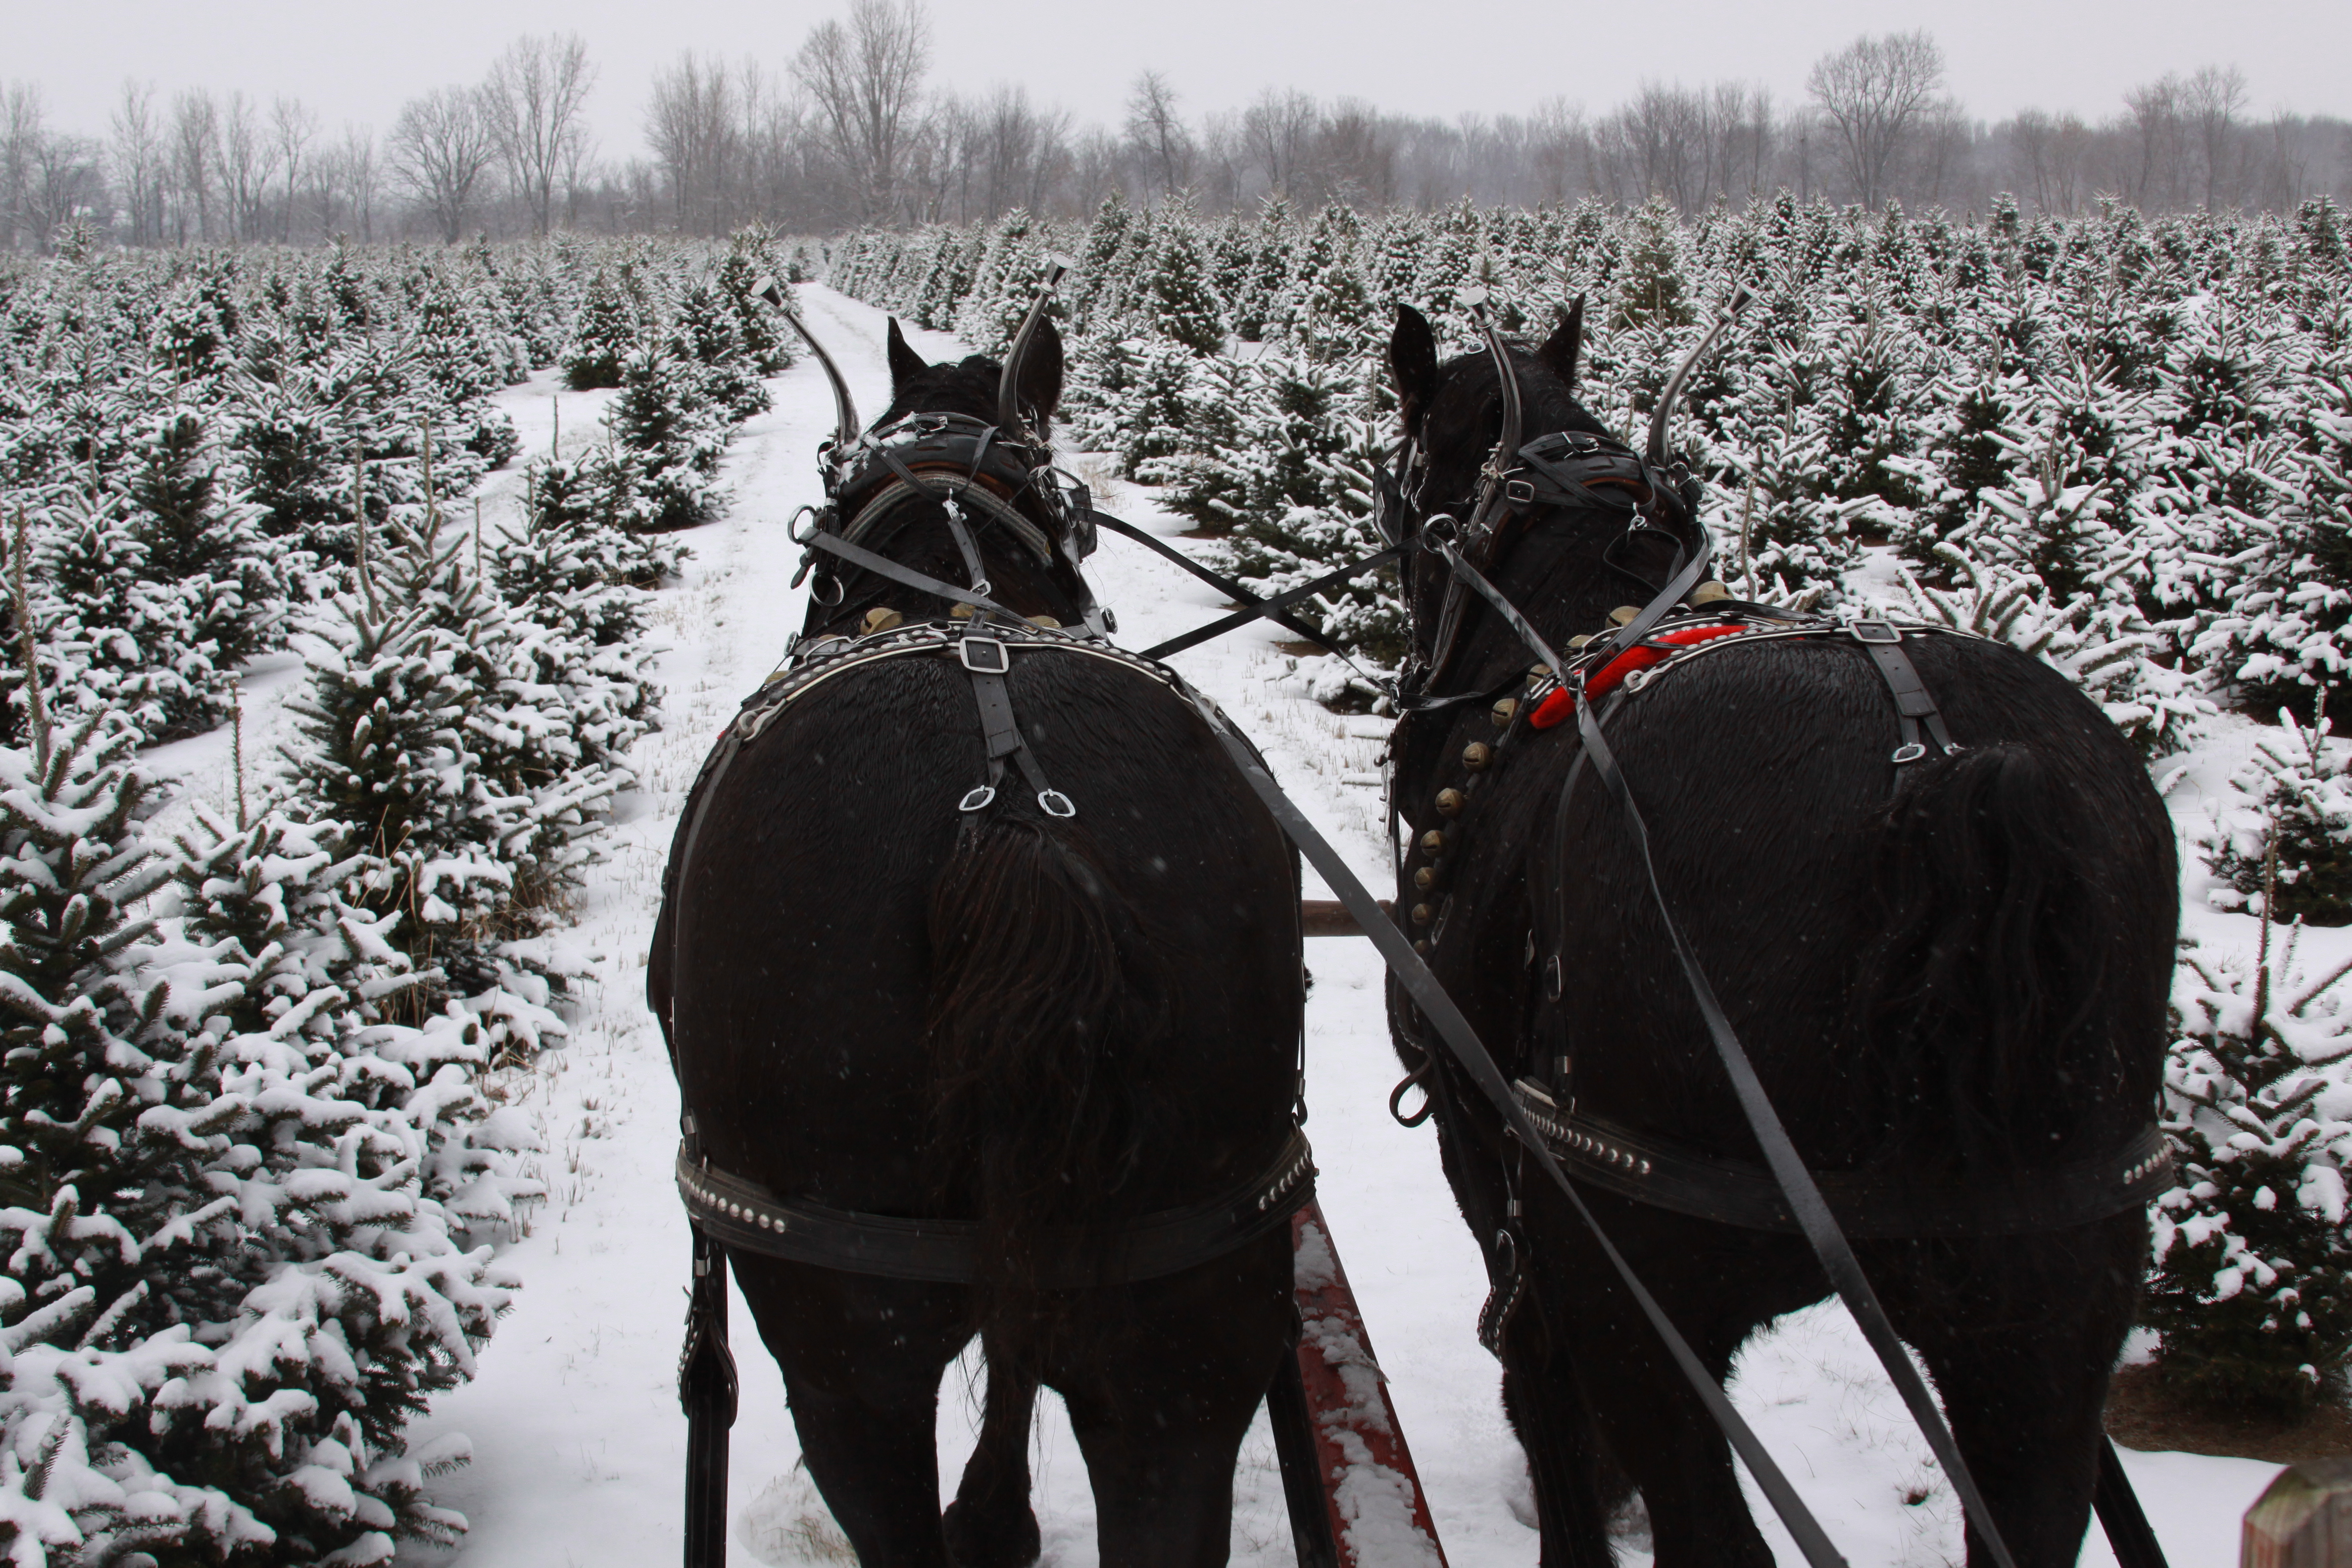 Sleigh ride in the trees